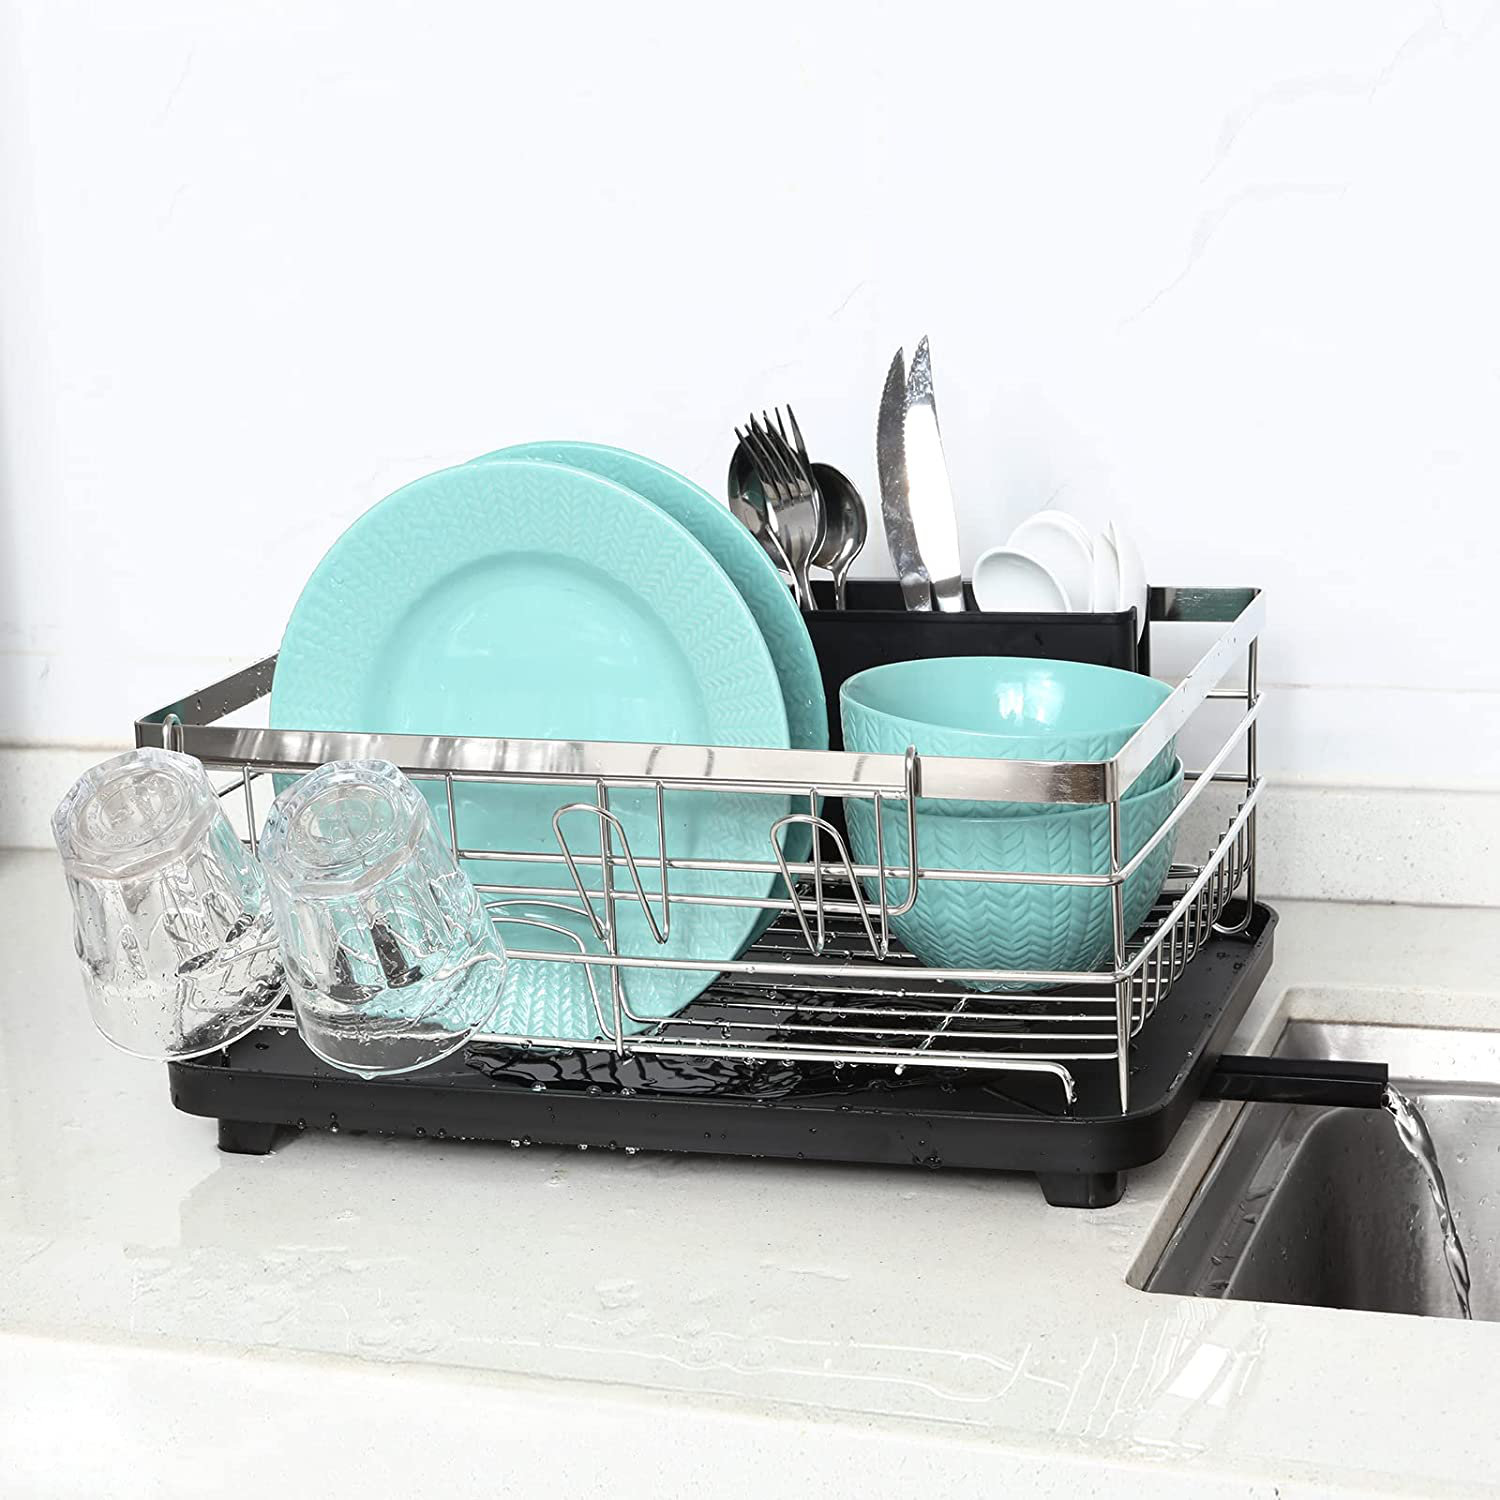 KINGRACK Dish Drying Rack - Extendable Dish Rack - Durable Stainless Steel  Dish Drainer for Kitchen Counter with Drainboard Set, Swivel Spout,Utensil